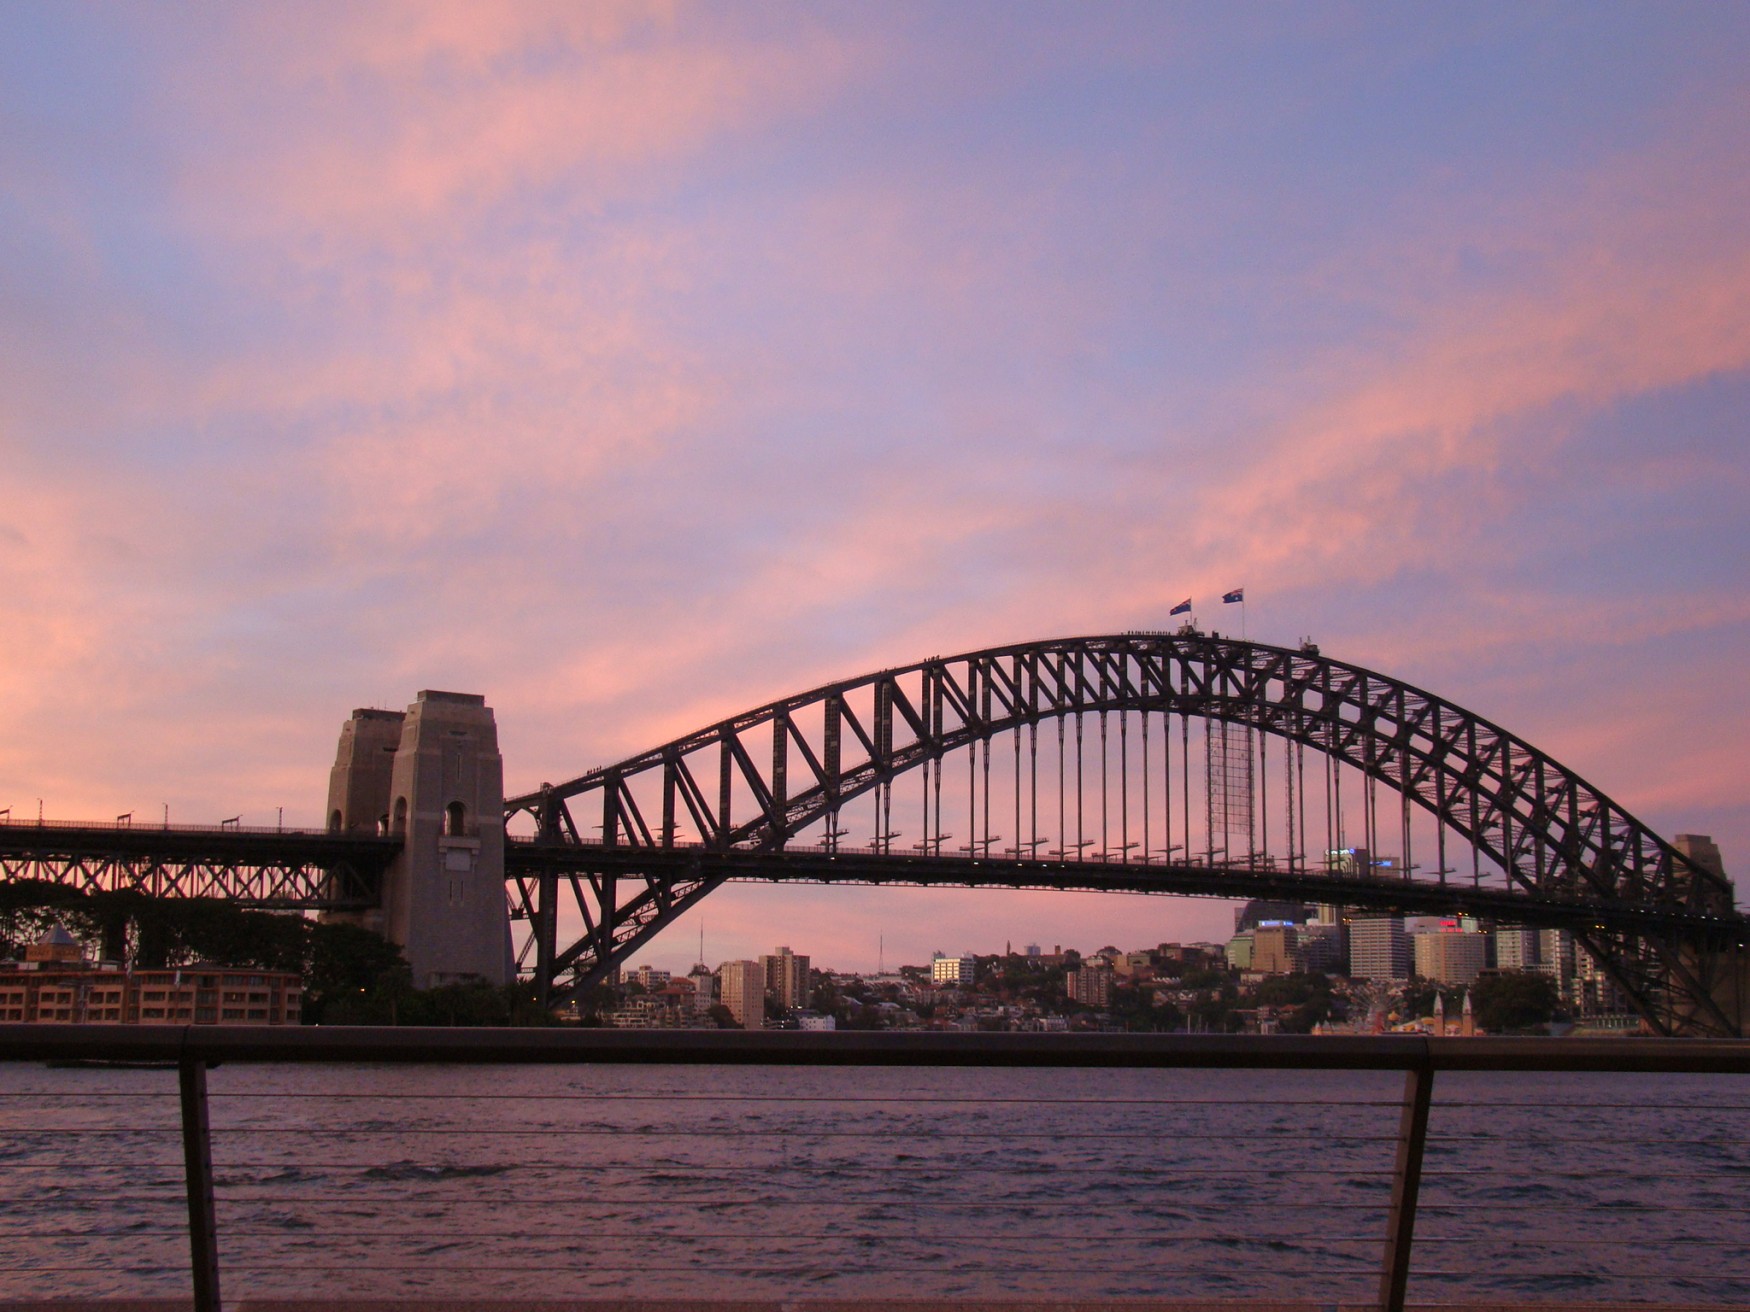 Sydney Harbour Bridge over water with buildings in the background